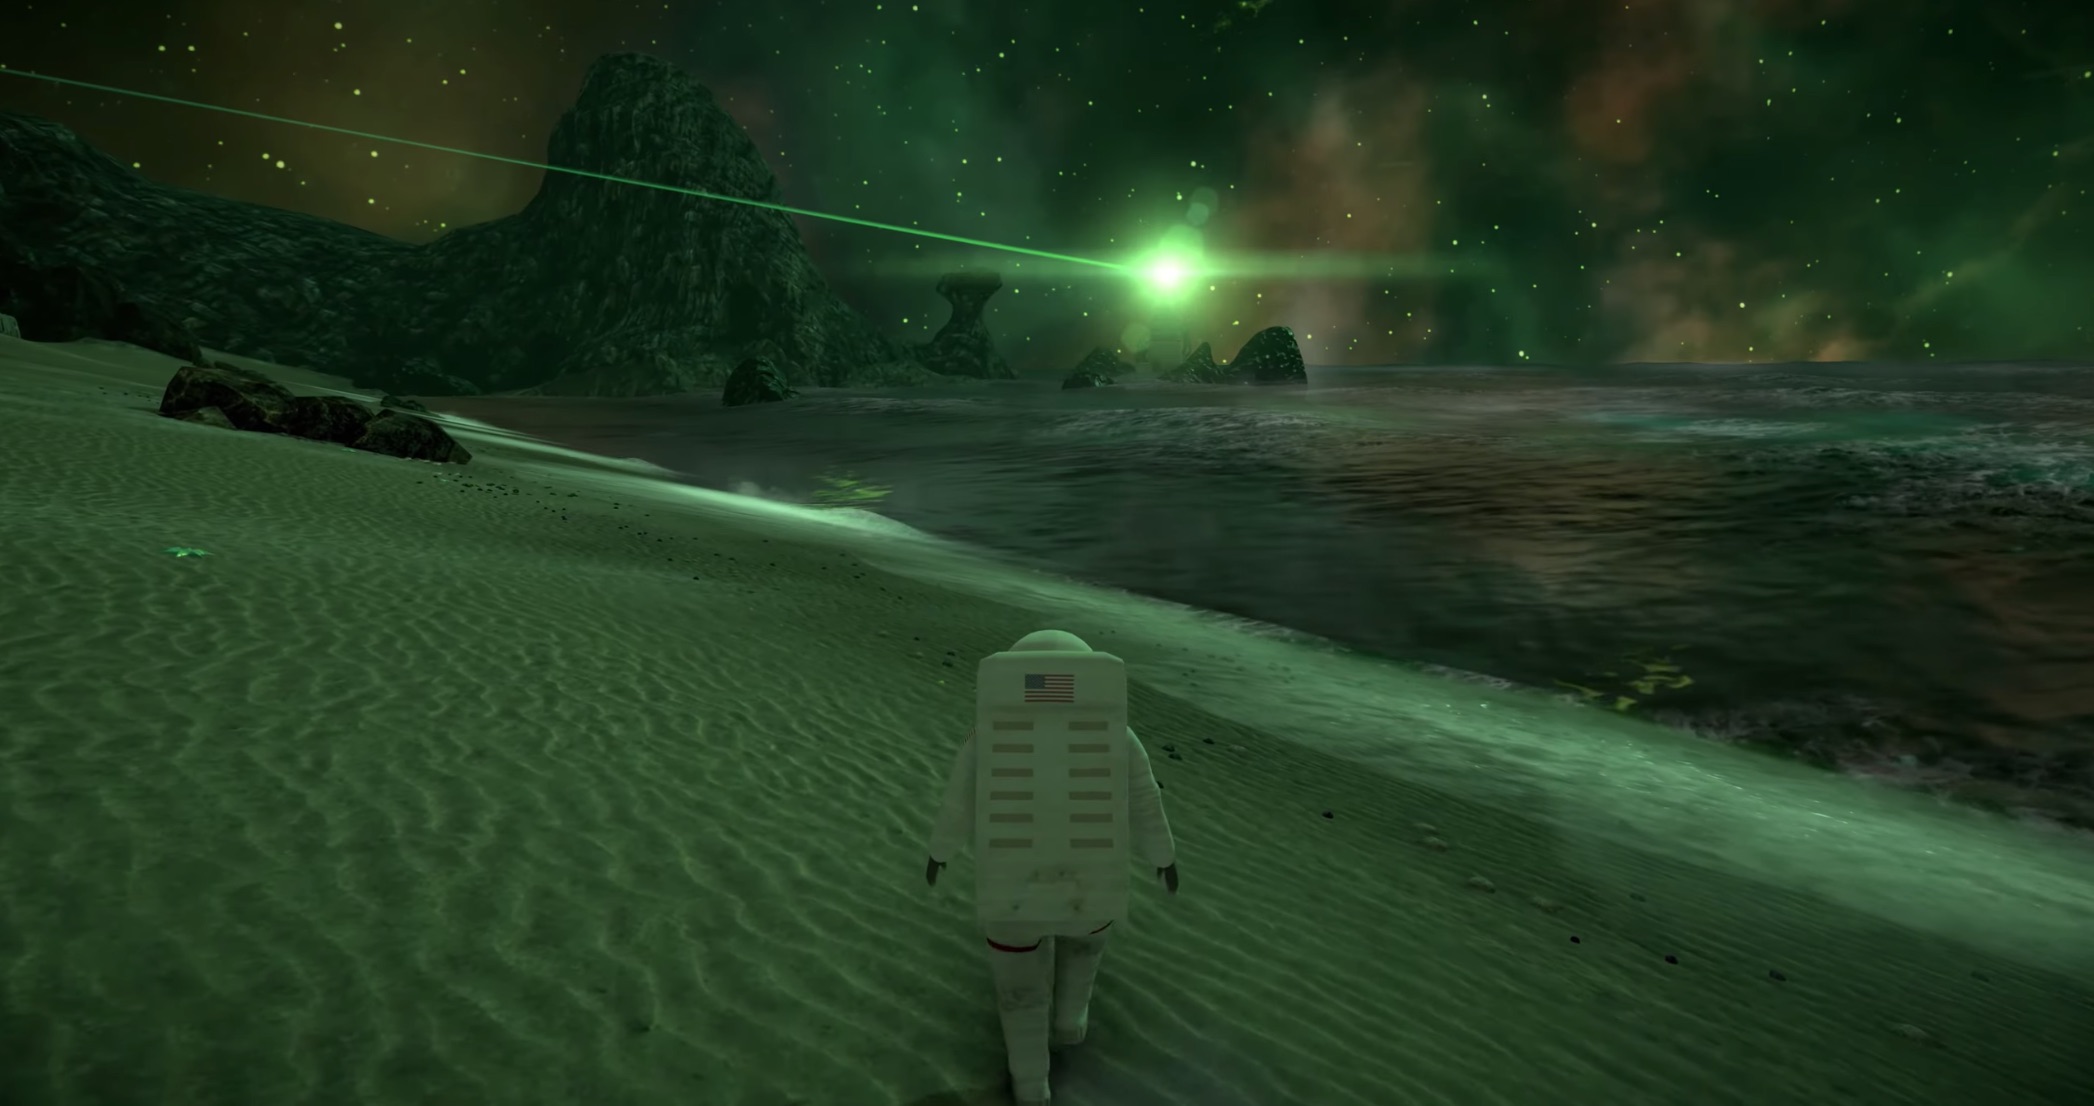  Explore an Apollo-era mission gone wrong in sci-fi mystery game 'Lifeless Moon' (video) 